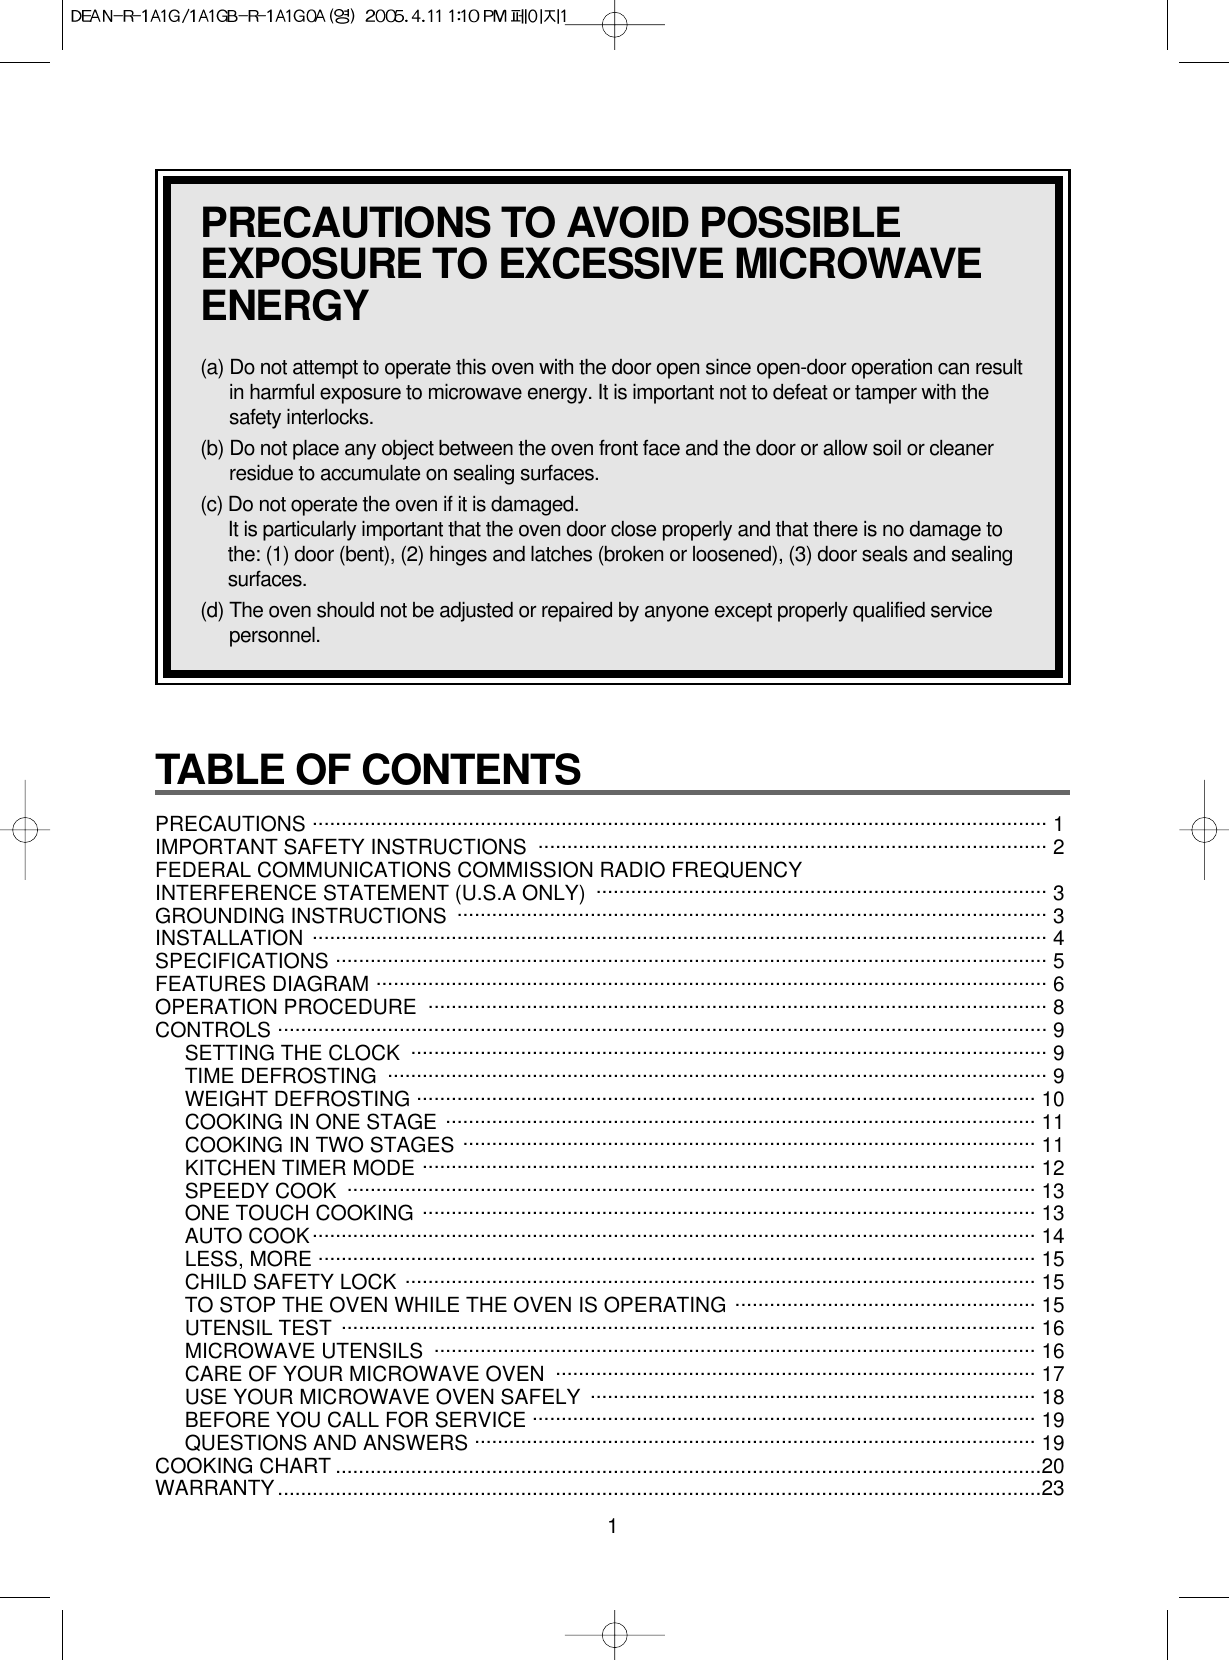 1TABLE OF CONTENTS PRECAUTIONS ............................................................................................................................... 1 IMPORTANT SAFETY INSTRUCTIONS  ........................................................................................ 2FEDERAL COMMUNICATIONS COMMISSION RADIO FREQUENCY INTERFERENCE STATEMENT (U.S.A ONLY)  .............................................................................. 3GROUNDING INSTRUCTIONS  ...................................................................................................... 3INSTALLATION ............................................................................................................................... 4SPECIFICATIONS ........................................................................................................................... 5FEATURES DIAGRAM .................................................................................................................... 6OPERATION PROCEDURE ........................................................................................................... 8CONTROLS ..................................................................................................................................... 9SETTING THE CLOCK .............................................................................................................. 9TIME DEFROSTING .................................................................................................................. 9WEIGHT DEFROSTING ........................................................................................................... 10COOKING IN ONE STAGE ...................................................................................................... 11COOKING IN TWO STAGES ................................................................................................... 11KITCHEN TIMER MODE .......................................................................................................... 12SPEEDY COOK  ....................................................................................................................... 13ONE TOUCH COOKING .......................................................................................................... 13AUTO COOK............................................................................................................................. 14LESS, MORE ............................................................................................................................ 15CHILD SAFETY LOCK ............................................................................................................. 15TO STOP THE OVEN WHILE THE OVEN IS OPERATING .................................................... 15UTENSIL TEST ........................................................................................................................ 16MICROWAVE UTENSILS  ........................................................................................................ 16CARE OF YOUR MICROWAVE OVEN  ................................................................................... 17USE YOUR MICROWAVE OVEN SAFELY  ............................................................................. 18BEFORE YOU CALL FOR SERVICE ....................................................................................... 19QUESTIONS AND ANSWERS ................................................................................................. 19COOKING CHART ..........................................................................................................................20WARRANTY....................................................................................................................................23PRECAUTIONS TO AVOID POSSIBLEEXPOSURE TO EXCESSIVE MICROWAVEENERGY(a) Do not attempt to operate this oven with the door open since open-door operation can resultin harmful exposure to microwave energy. It is important not to defeat or tamper with thesafety interlocks.(b) Do not place any object between the oven front face and the door or allow soil or cleanerresidue to accumulate on sealing surfaces.(c) Do not operate the oven if it is damaged.It is particularly important that the oven door close properly and that there is no damage tothe: (1) door (bent), (2) hinges and latches (broken or loosened), (3) door seals and sealingsurfaces.(d) The oven should not be adjusted or repaired by anyone except properly qualified servicepersonnel.